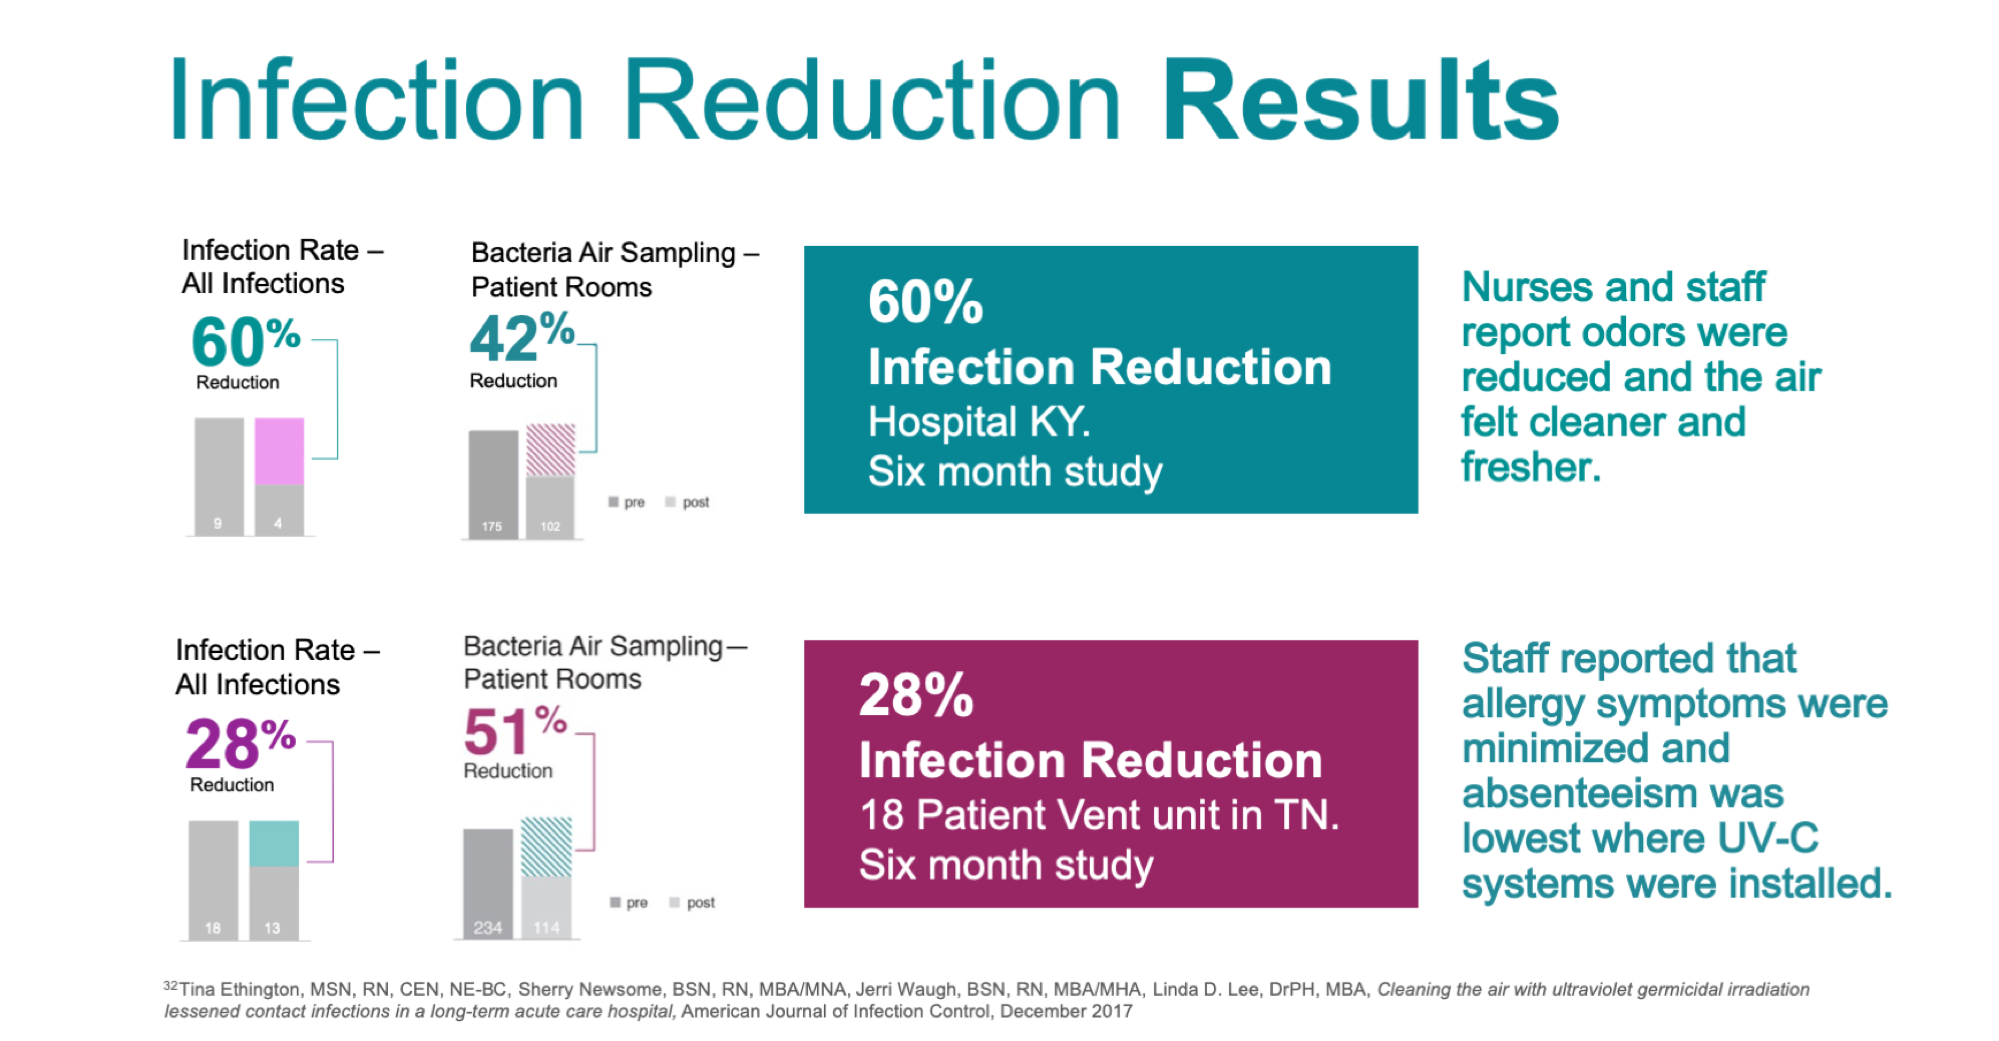 Infection Reduction results